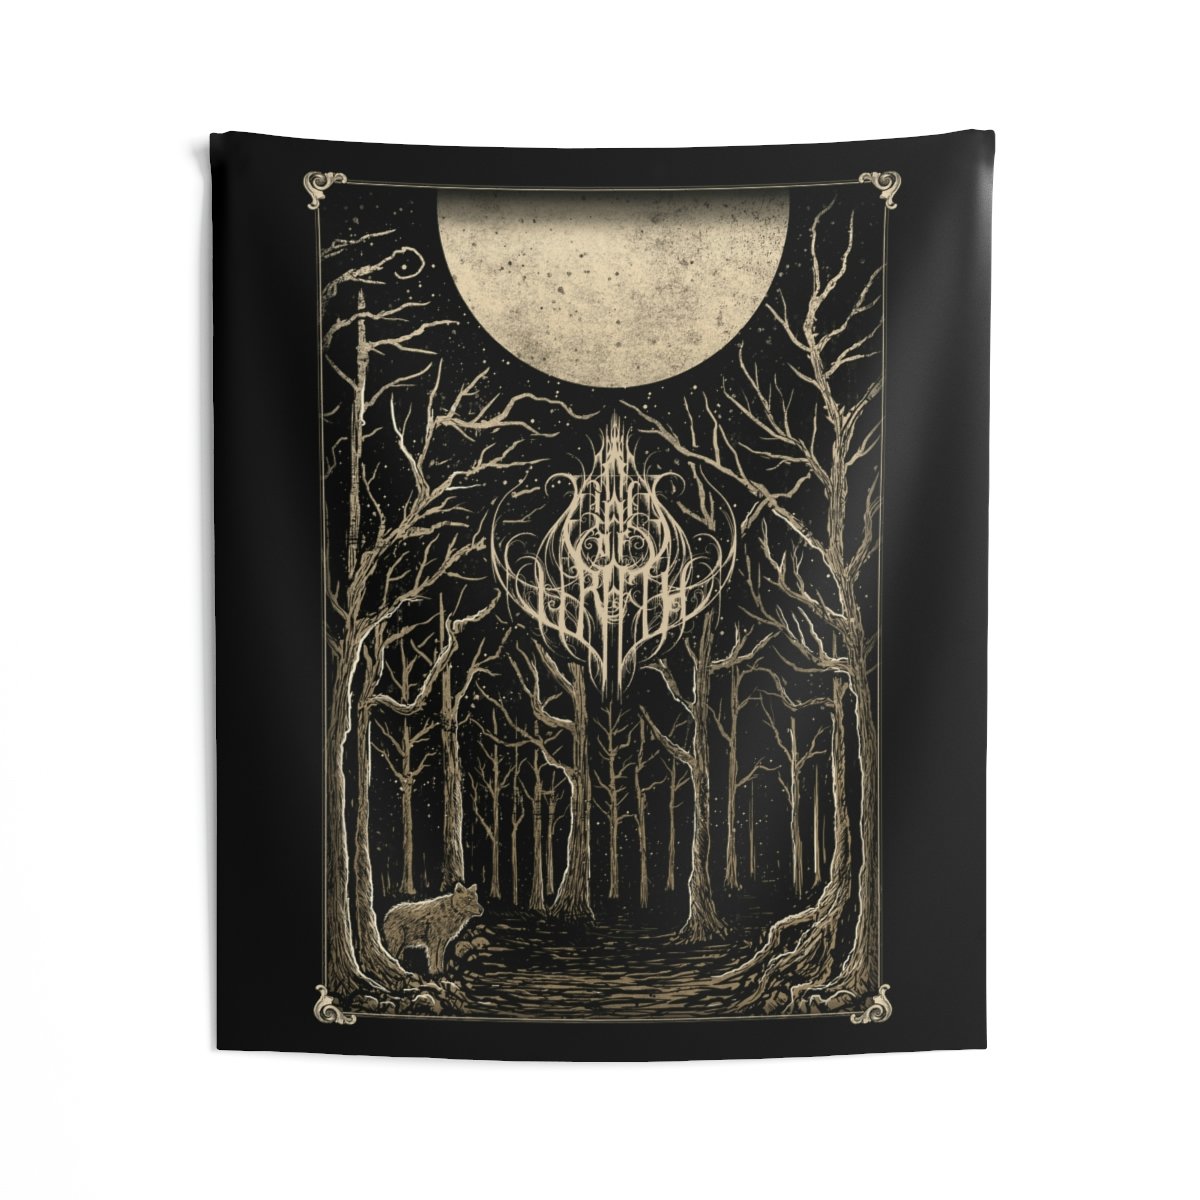 Vials of Wrath – Alone in the Wilderness Indoor Wall Tapestries